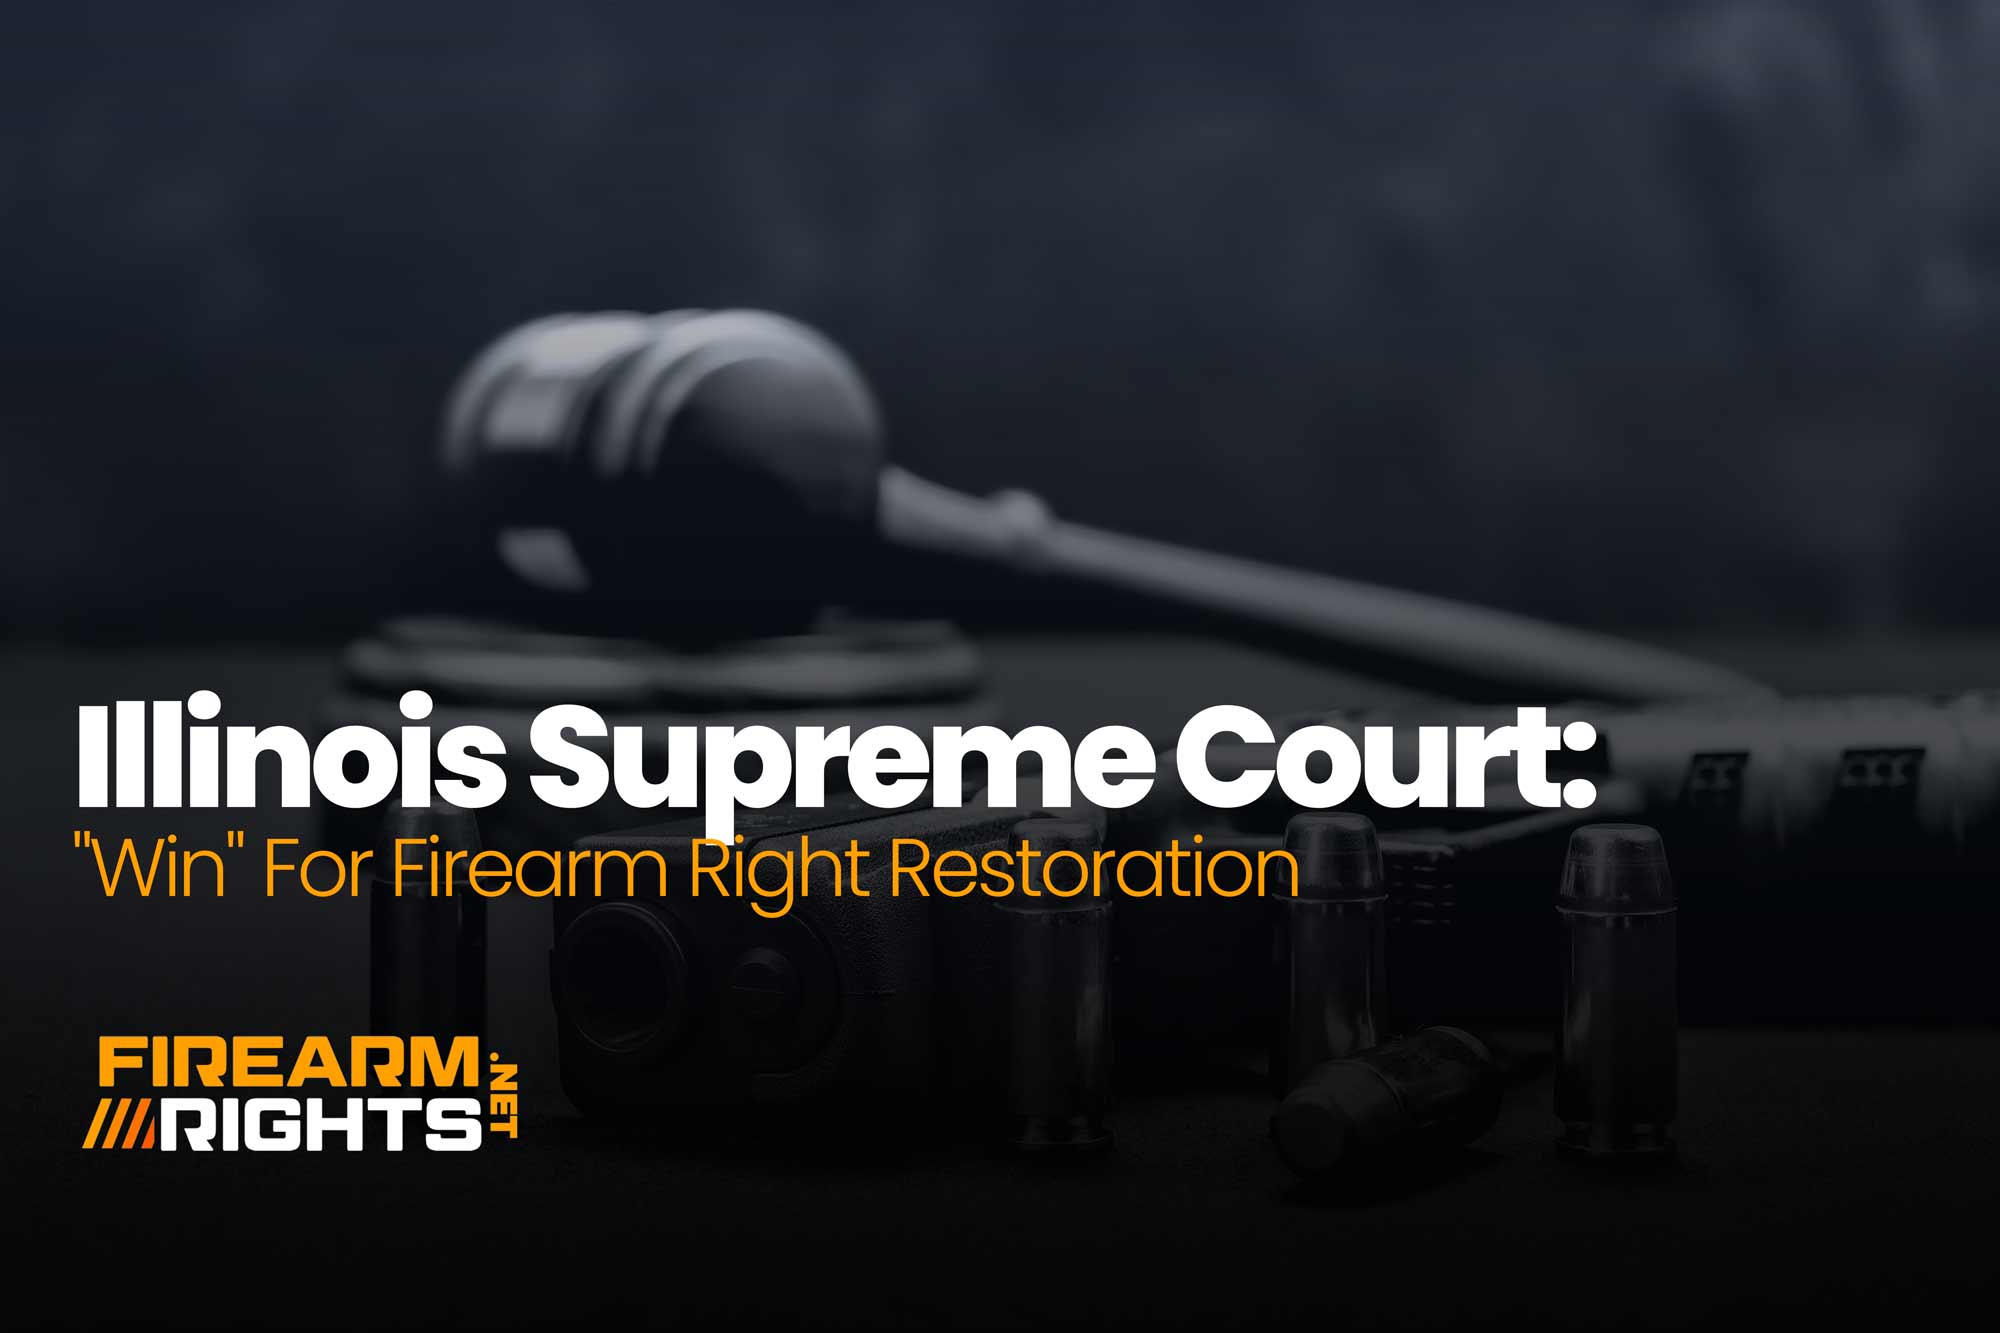 Illinois Supreme Court Issues "Win" For Firearm Right Restoration